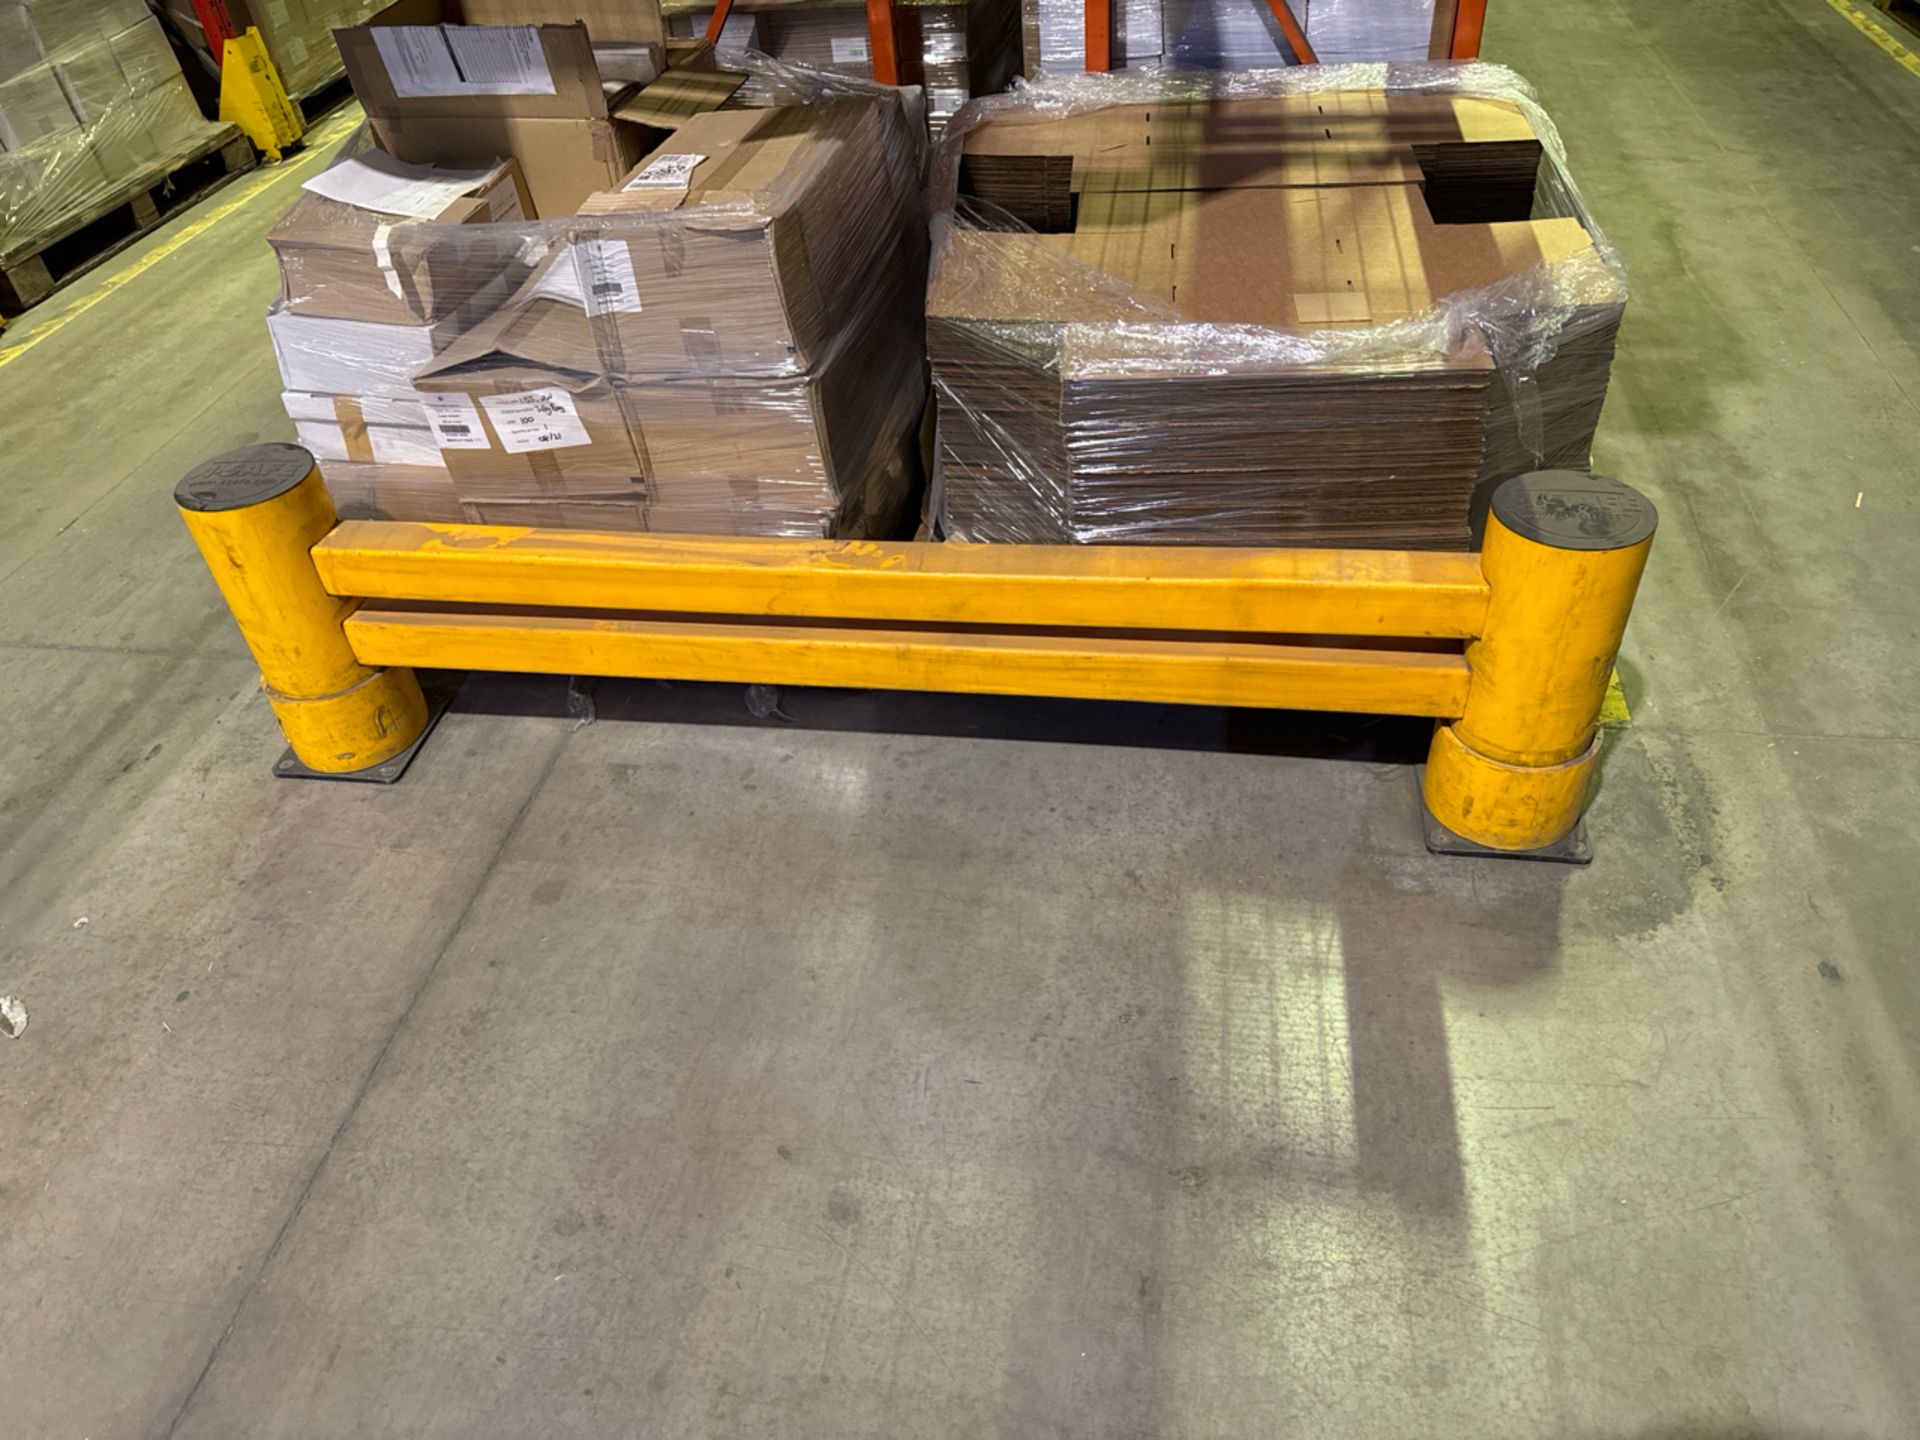 22 Bays Of Boltless Pallet Racking - Image 8 of 11